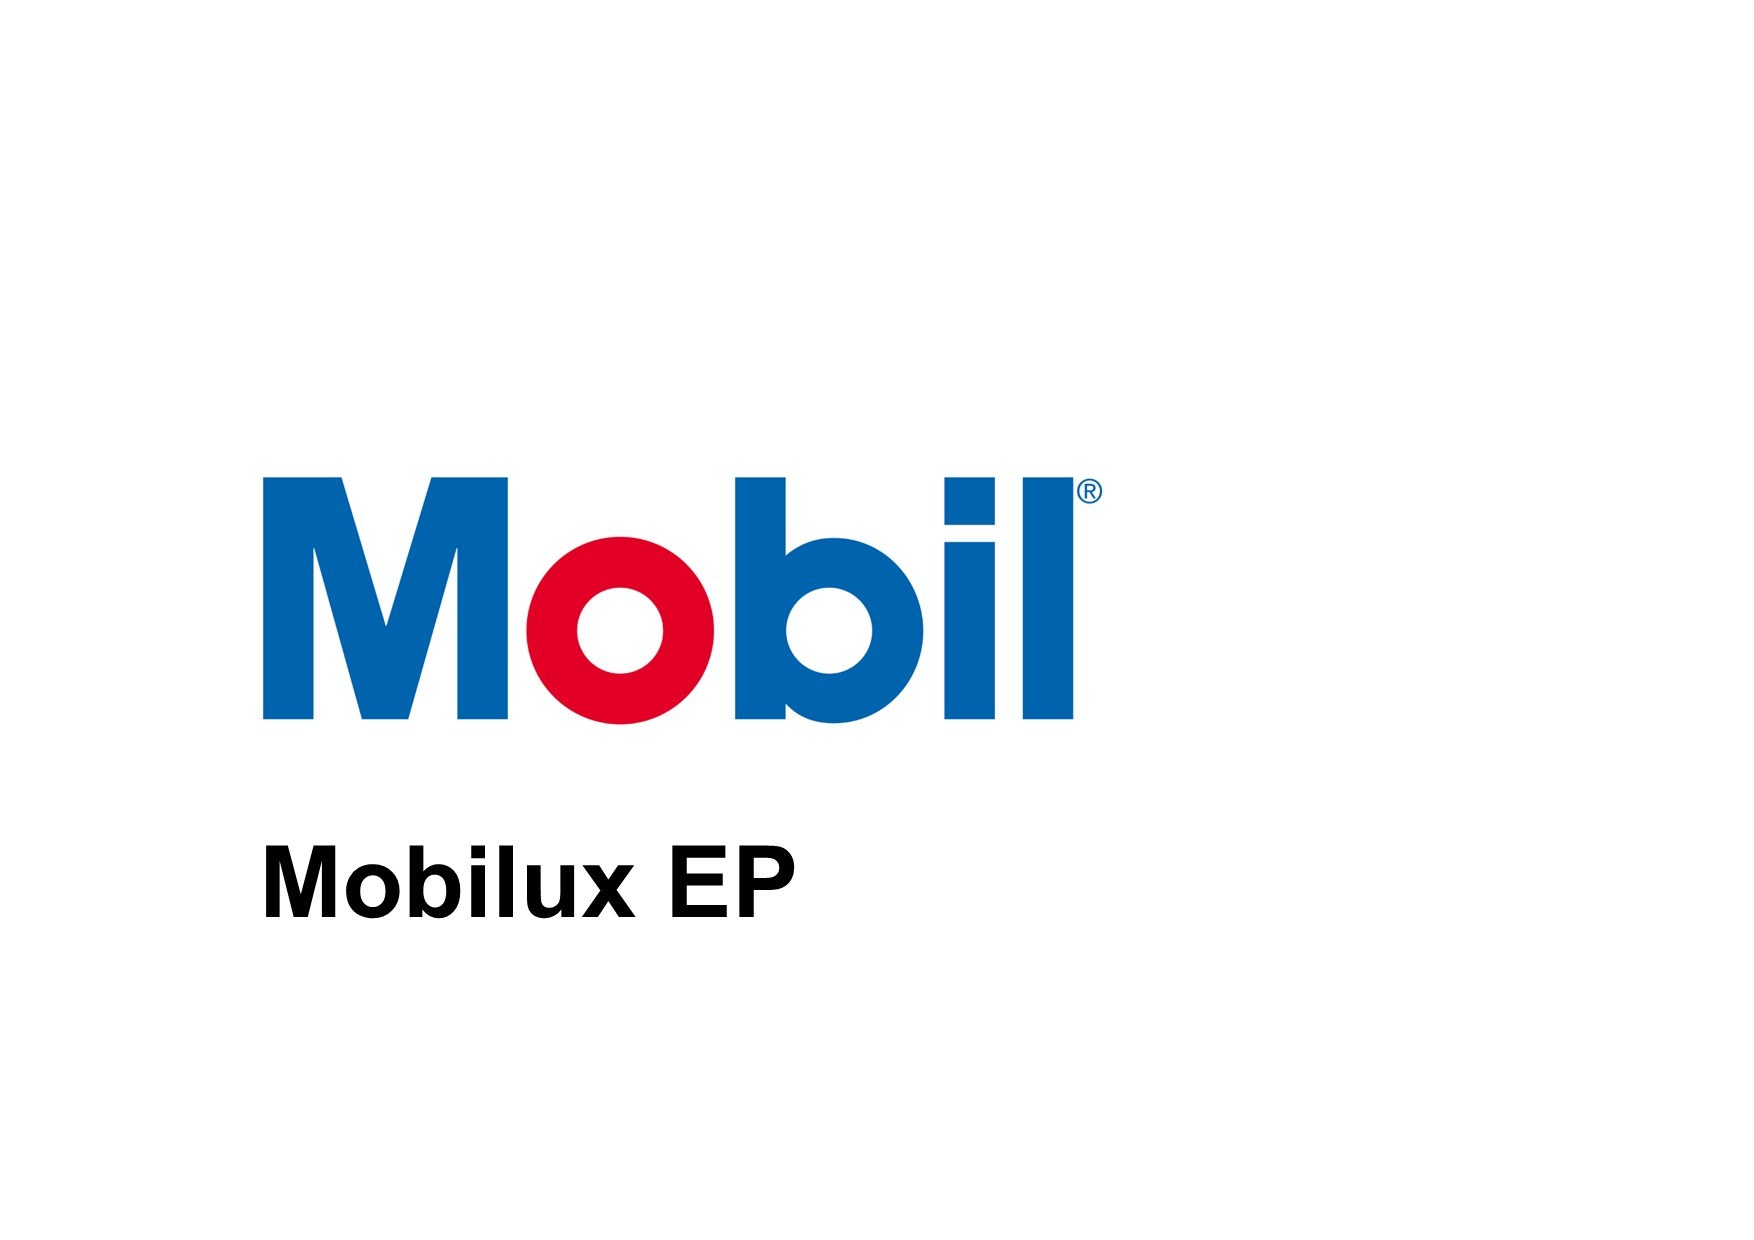 Mobilux ep